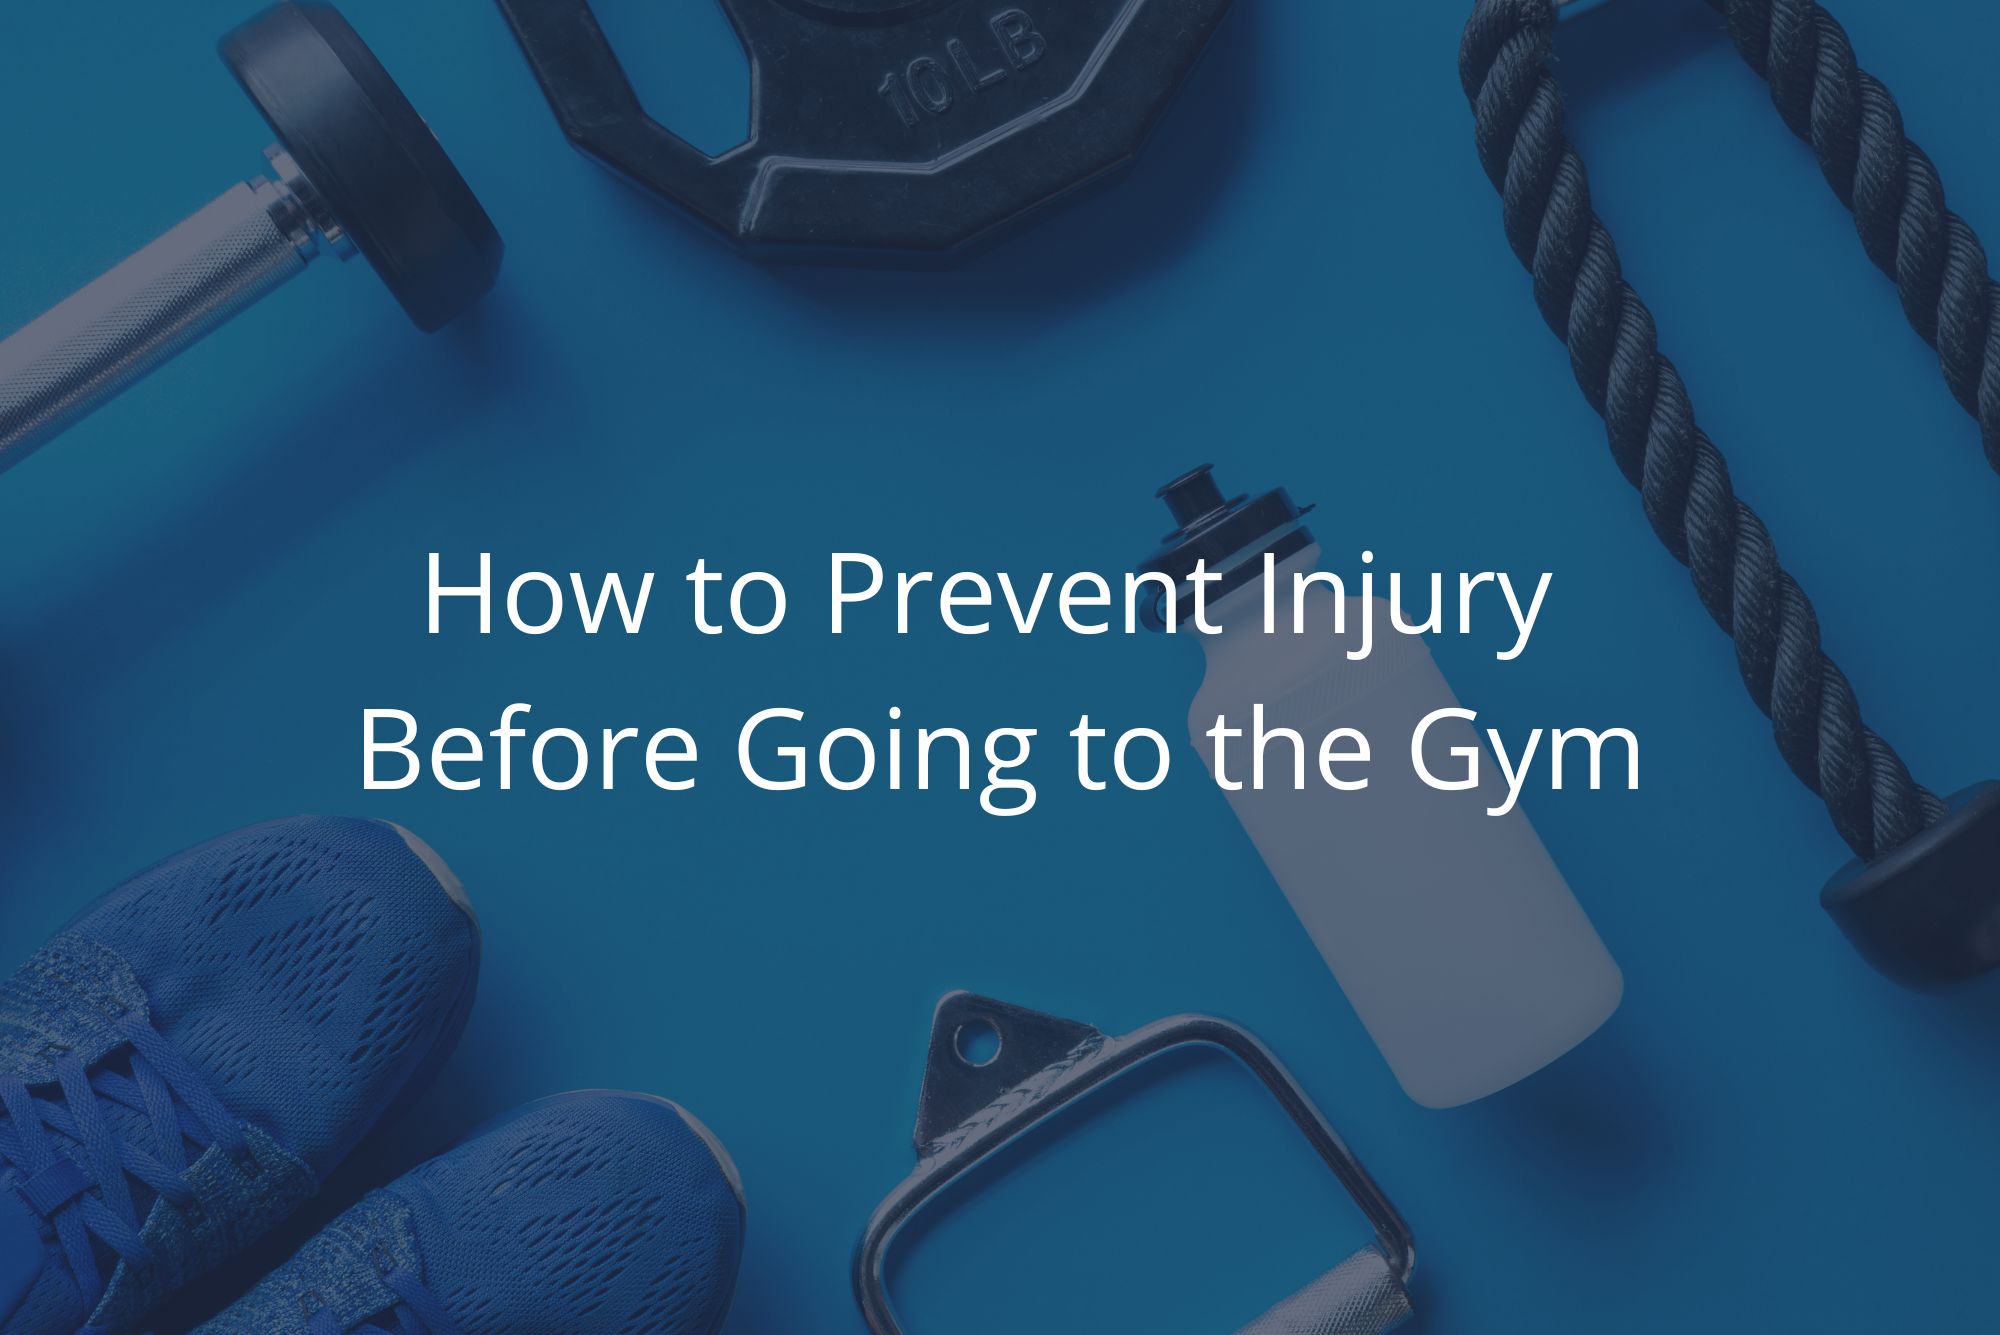 A water bottle, tennis shoes, dumbbell, and jump rope lay on a blue background in a post on how to prevent injury at the gym with a dark overlay.